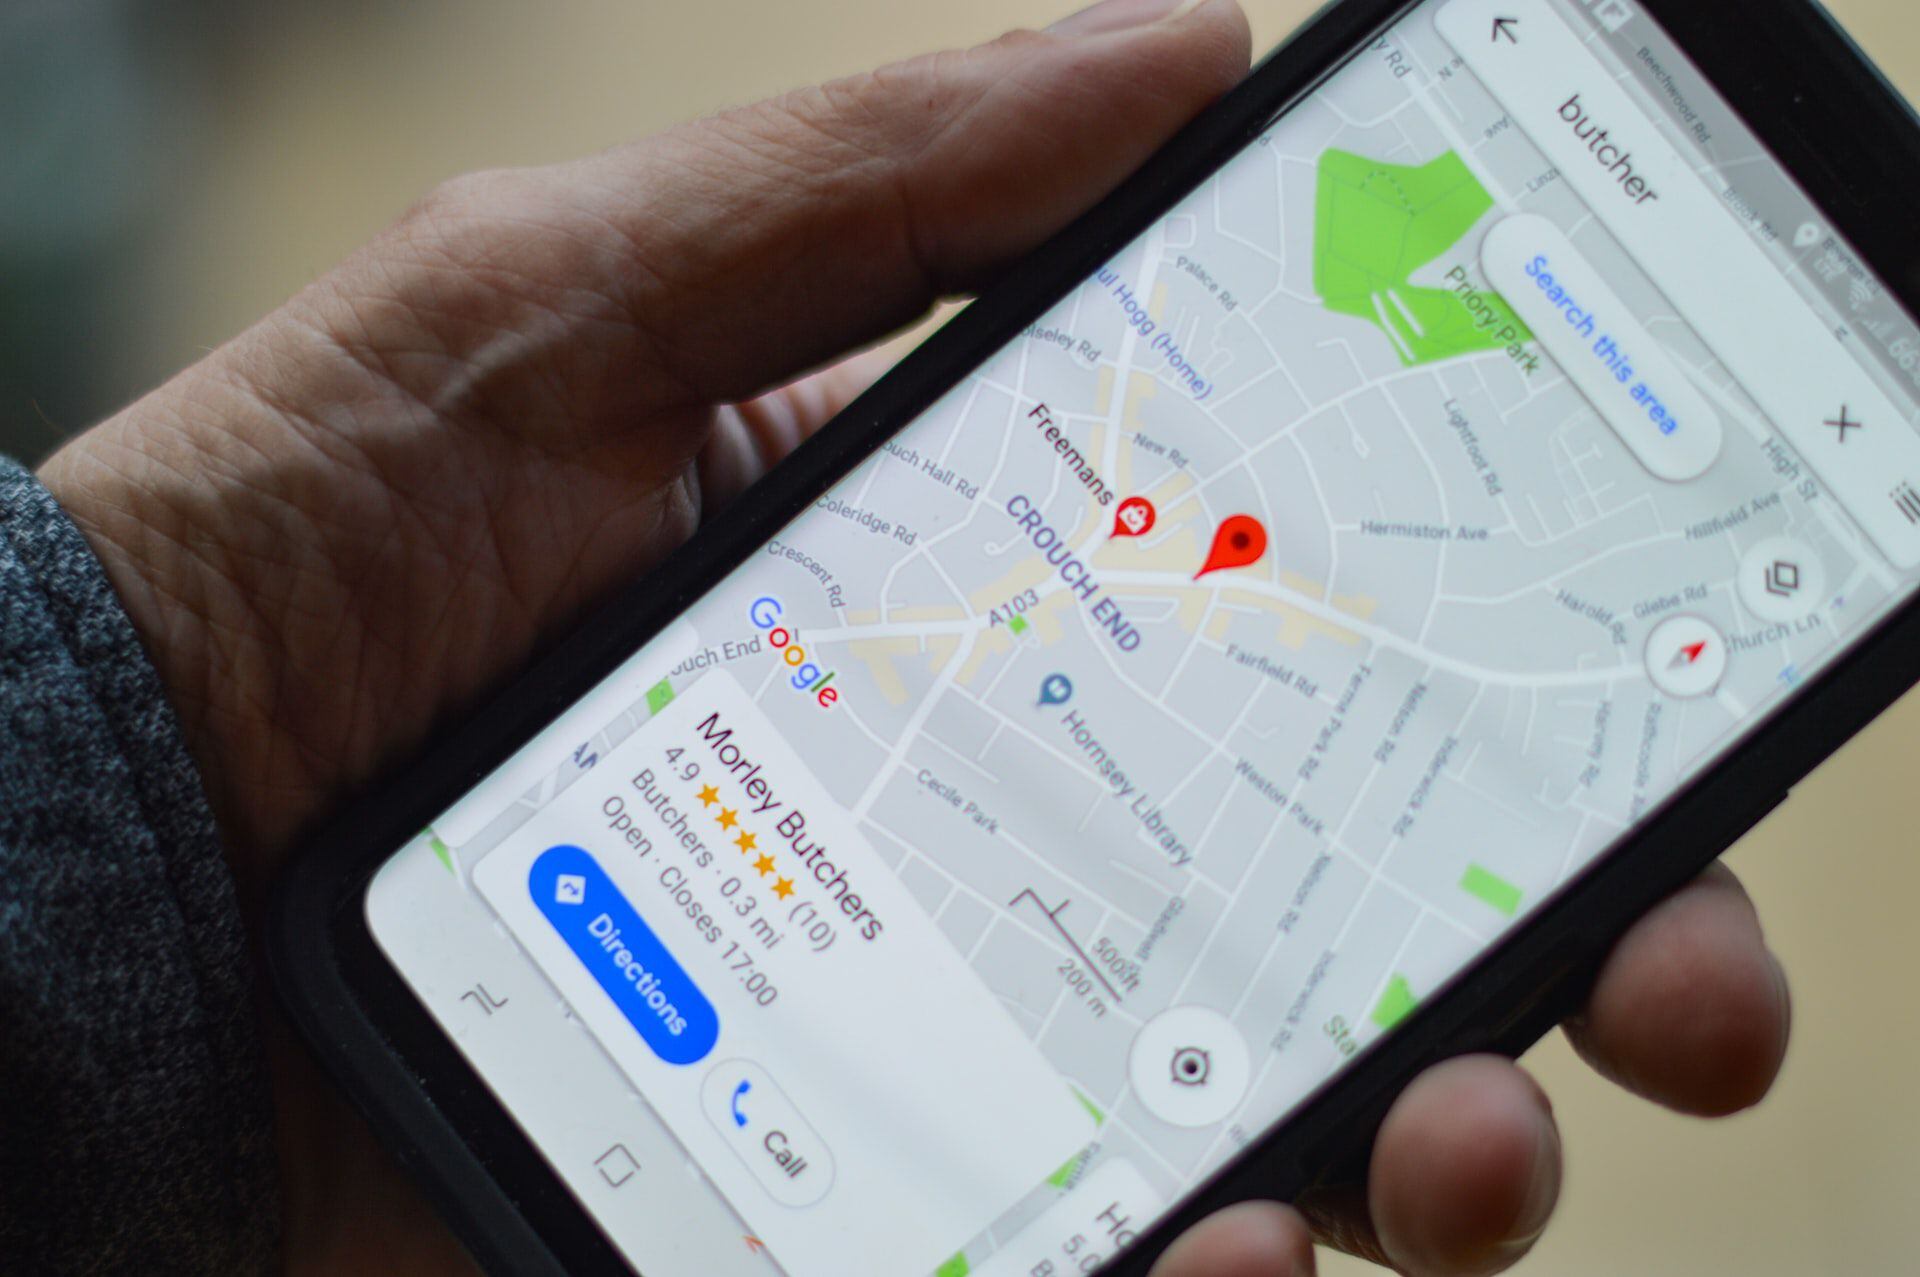 Through a combination of AI, machine learning, and human personnel, Google has reduced the amount of fraudulent or abusive content on Maps.  (Photo: Henry Perks/Unsplash)